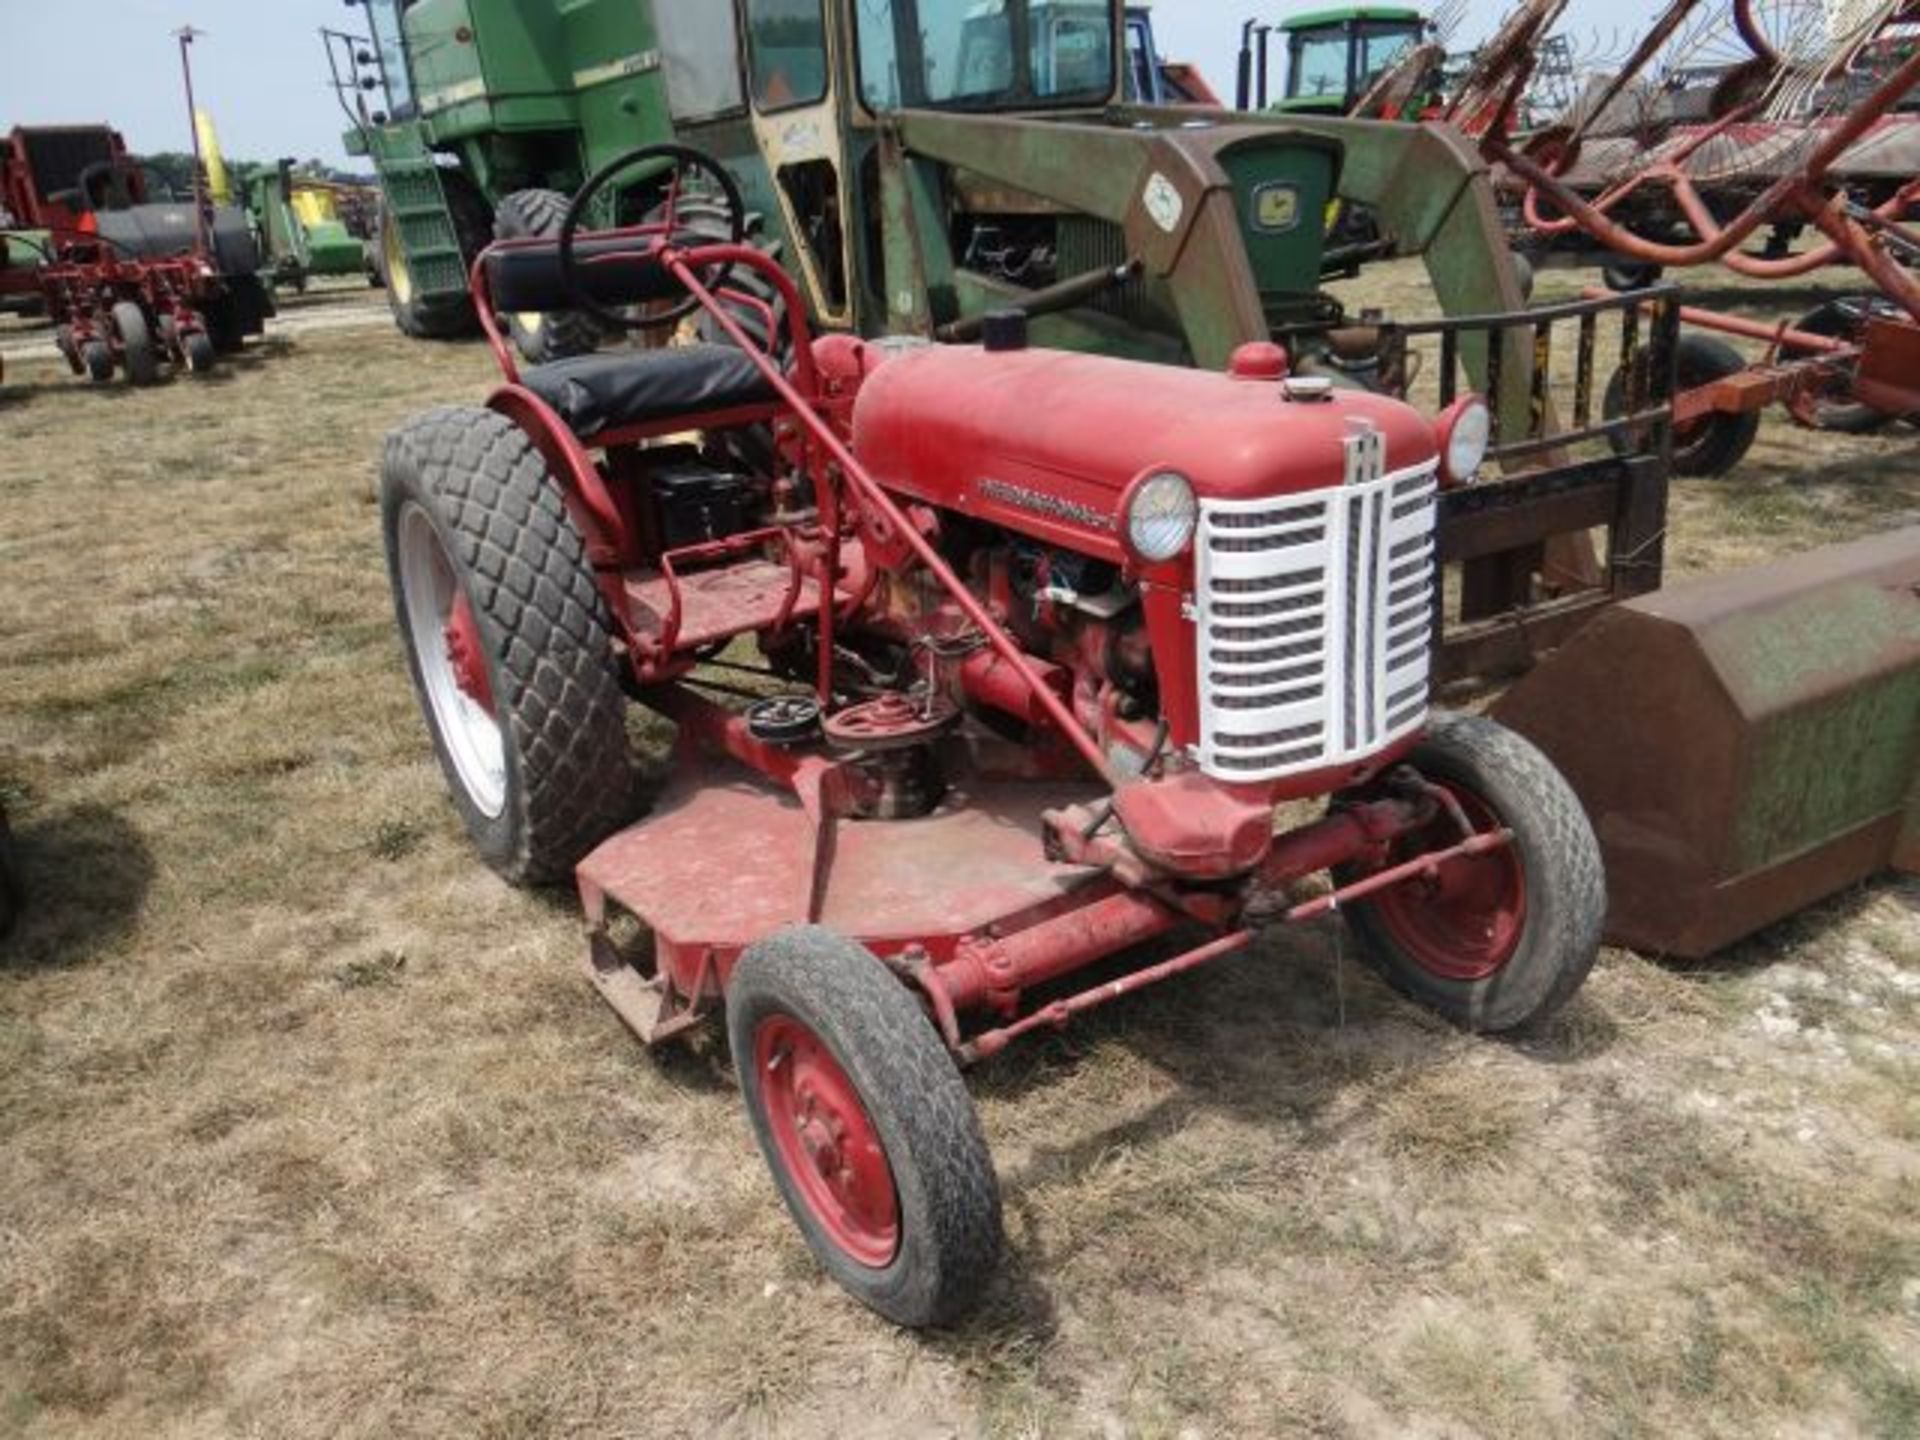 IH Cub Lowboy, 1955 Hyd Deck, Starts and Runs Good, New Starter and Battery, Turf Tires, Mows Good - Image 2 of 3